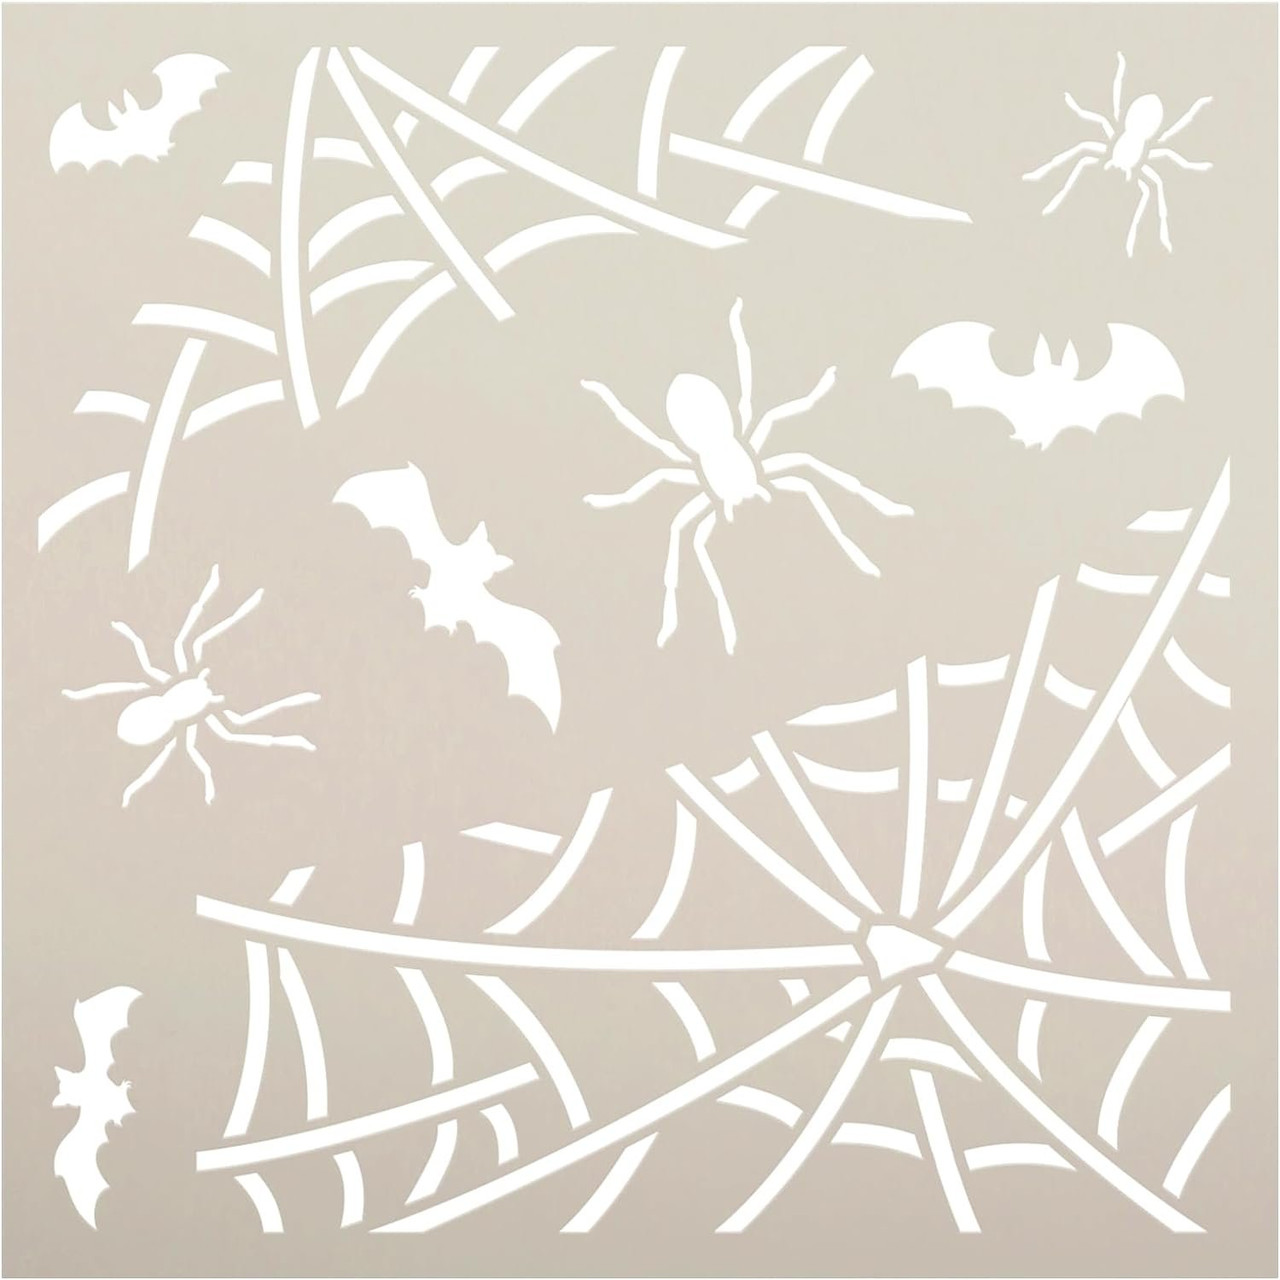 Spider Web Embellishment Stencil with Bats by StudioR12 - USA Made - DIY Halloween Decorations - Reusable Template for Crafting & Painting Wood Signs - STCL7184